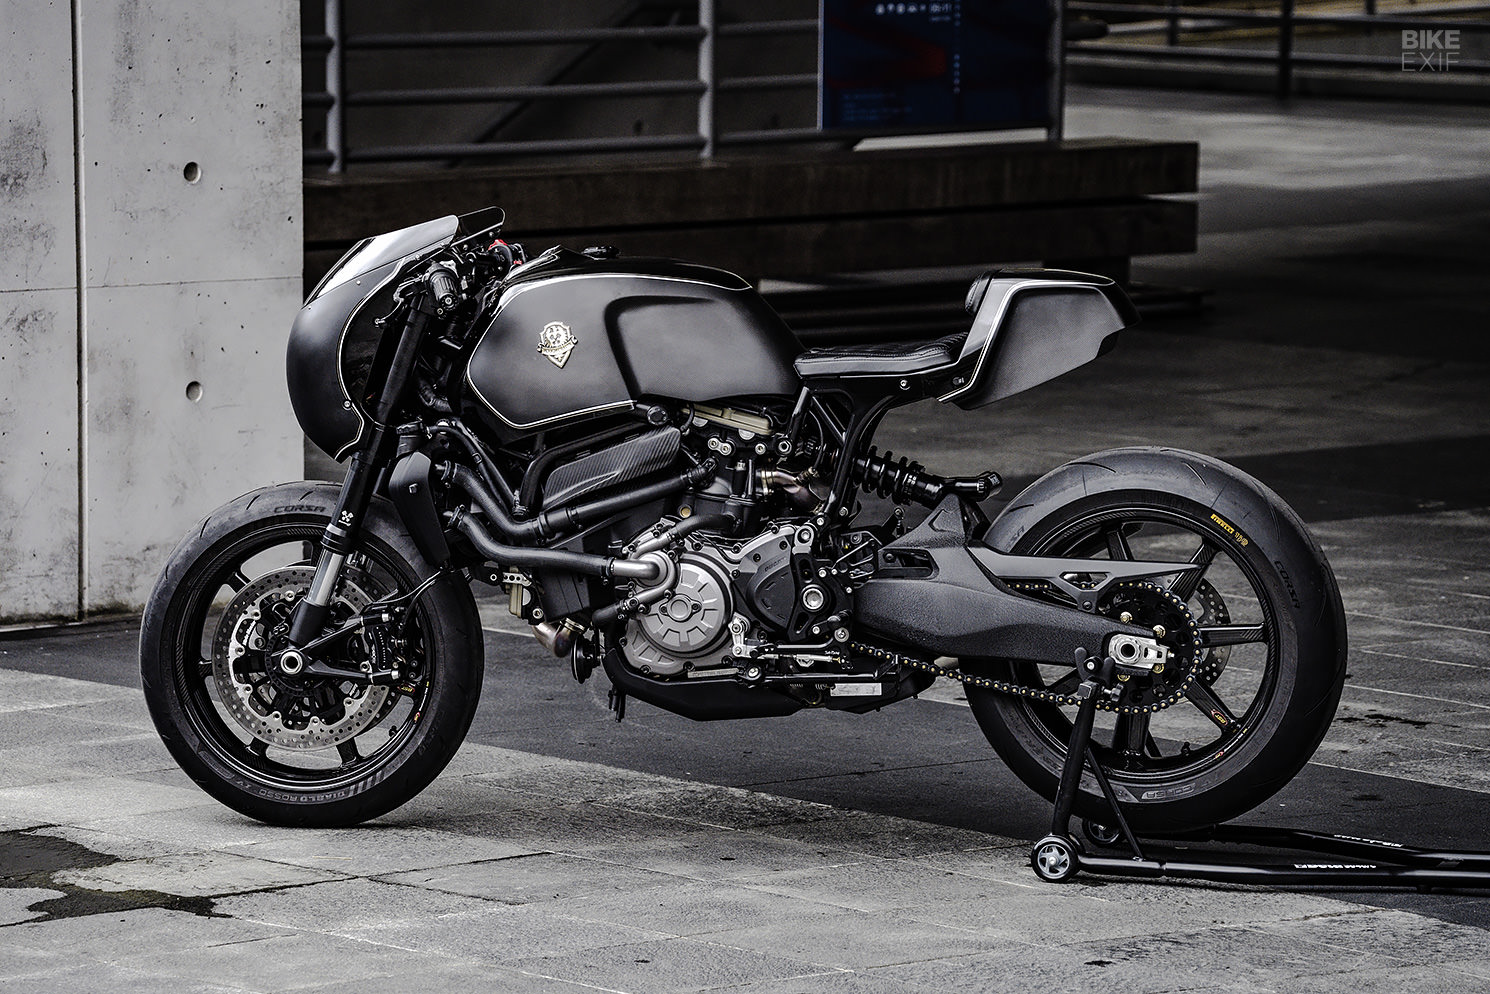 The New Black: A Ducati Monster 821 by Rough Crafts | Bike EXIF